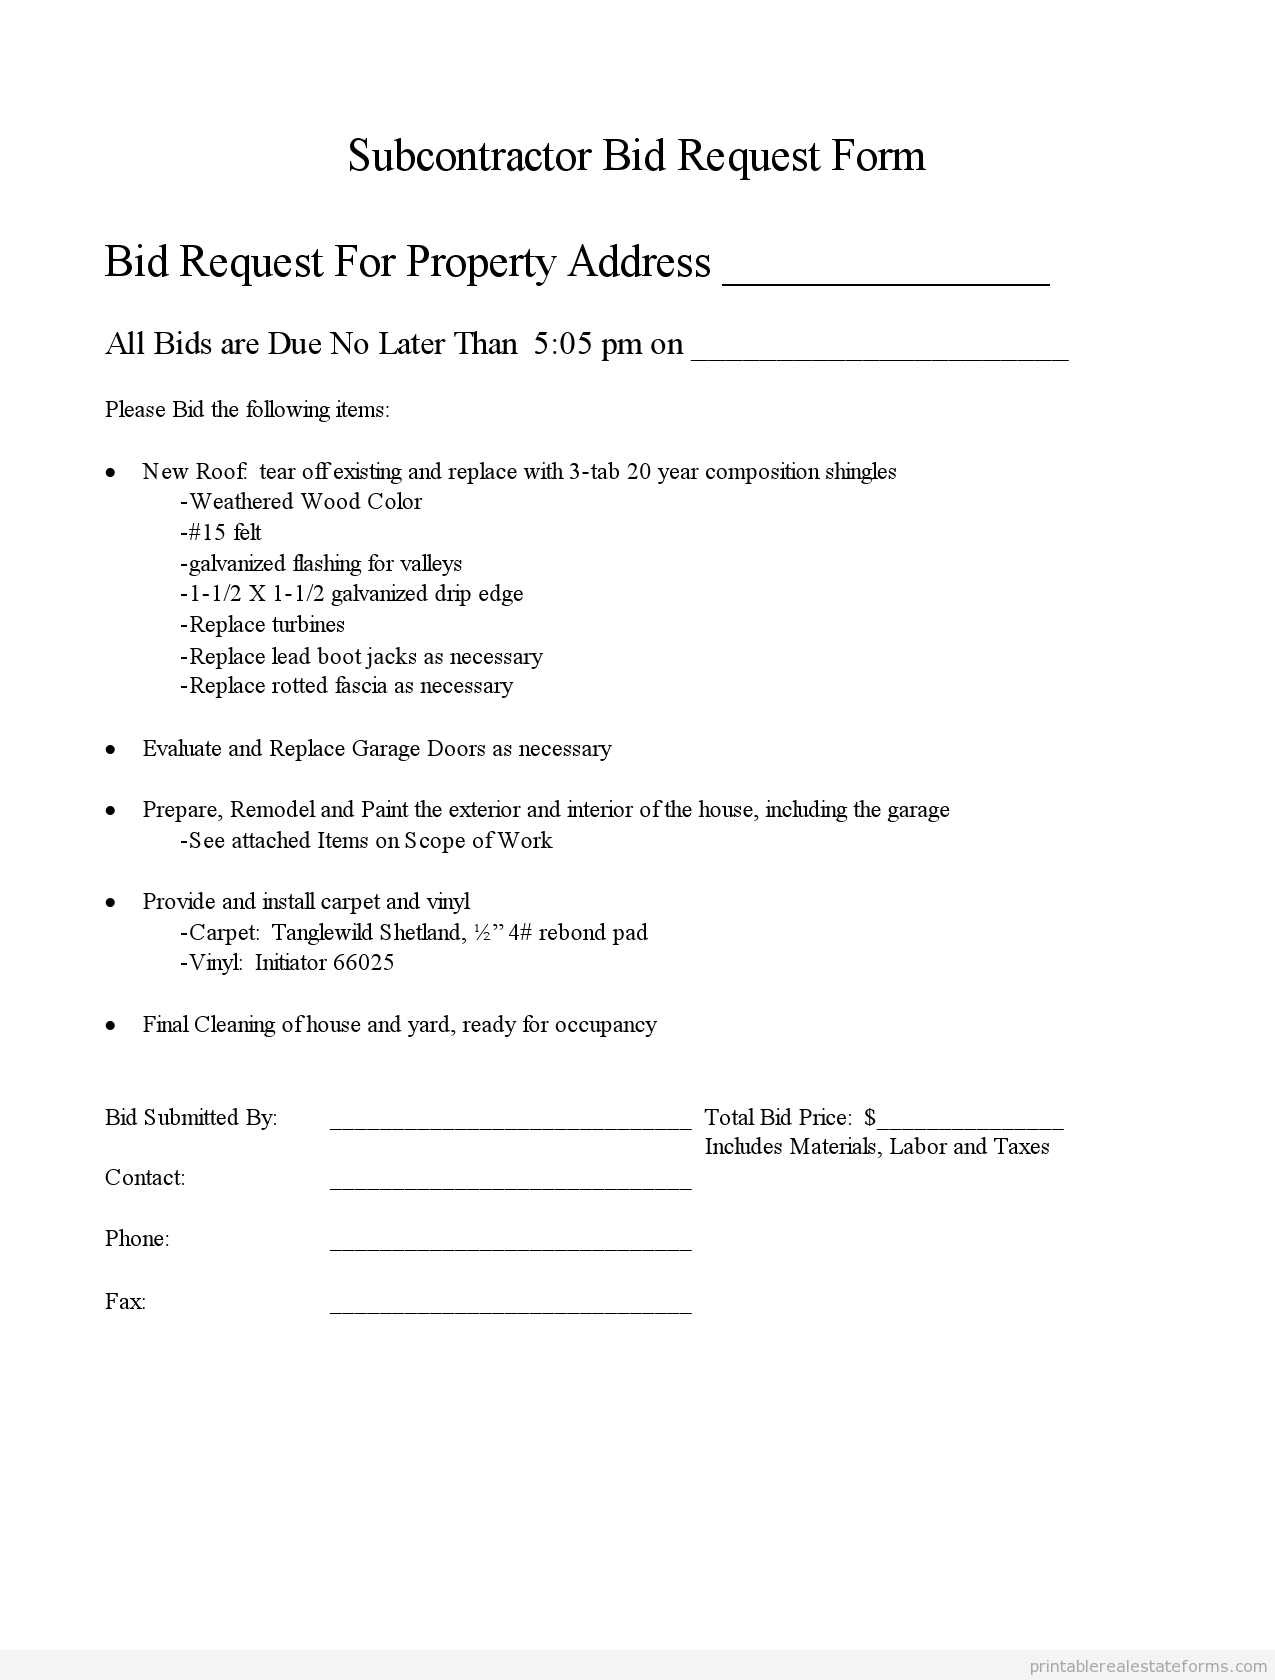 Printable Subcontractor Bid Request Form And Standardized Scope Of within size 1275 X 1680